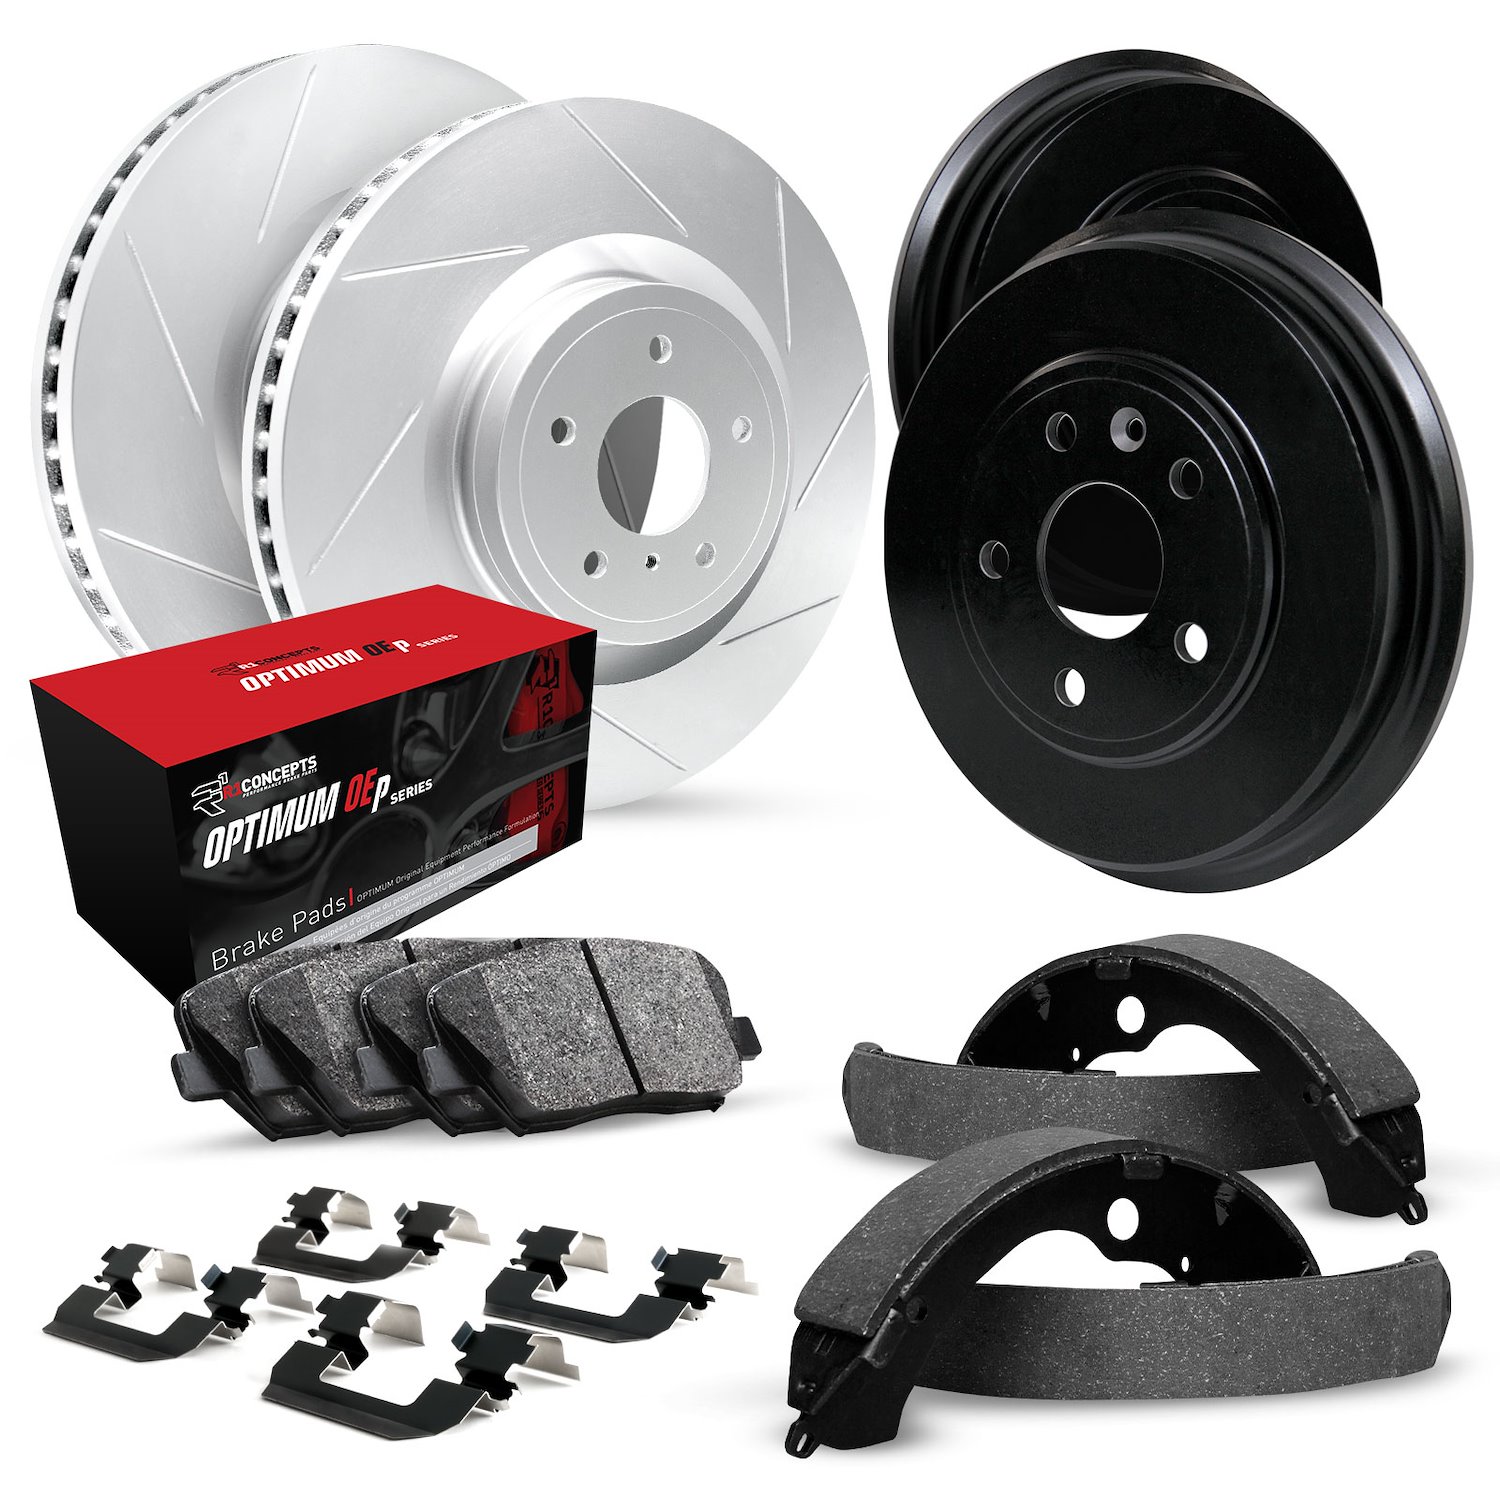 GEO-Carbon Slotted Brake Rotor & Drum Set w/Optimum OE Pads, Shoes, & Hardware, 1967-1968 GM, Position: Front & Rear